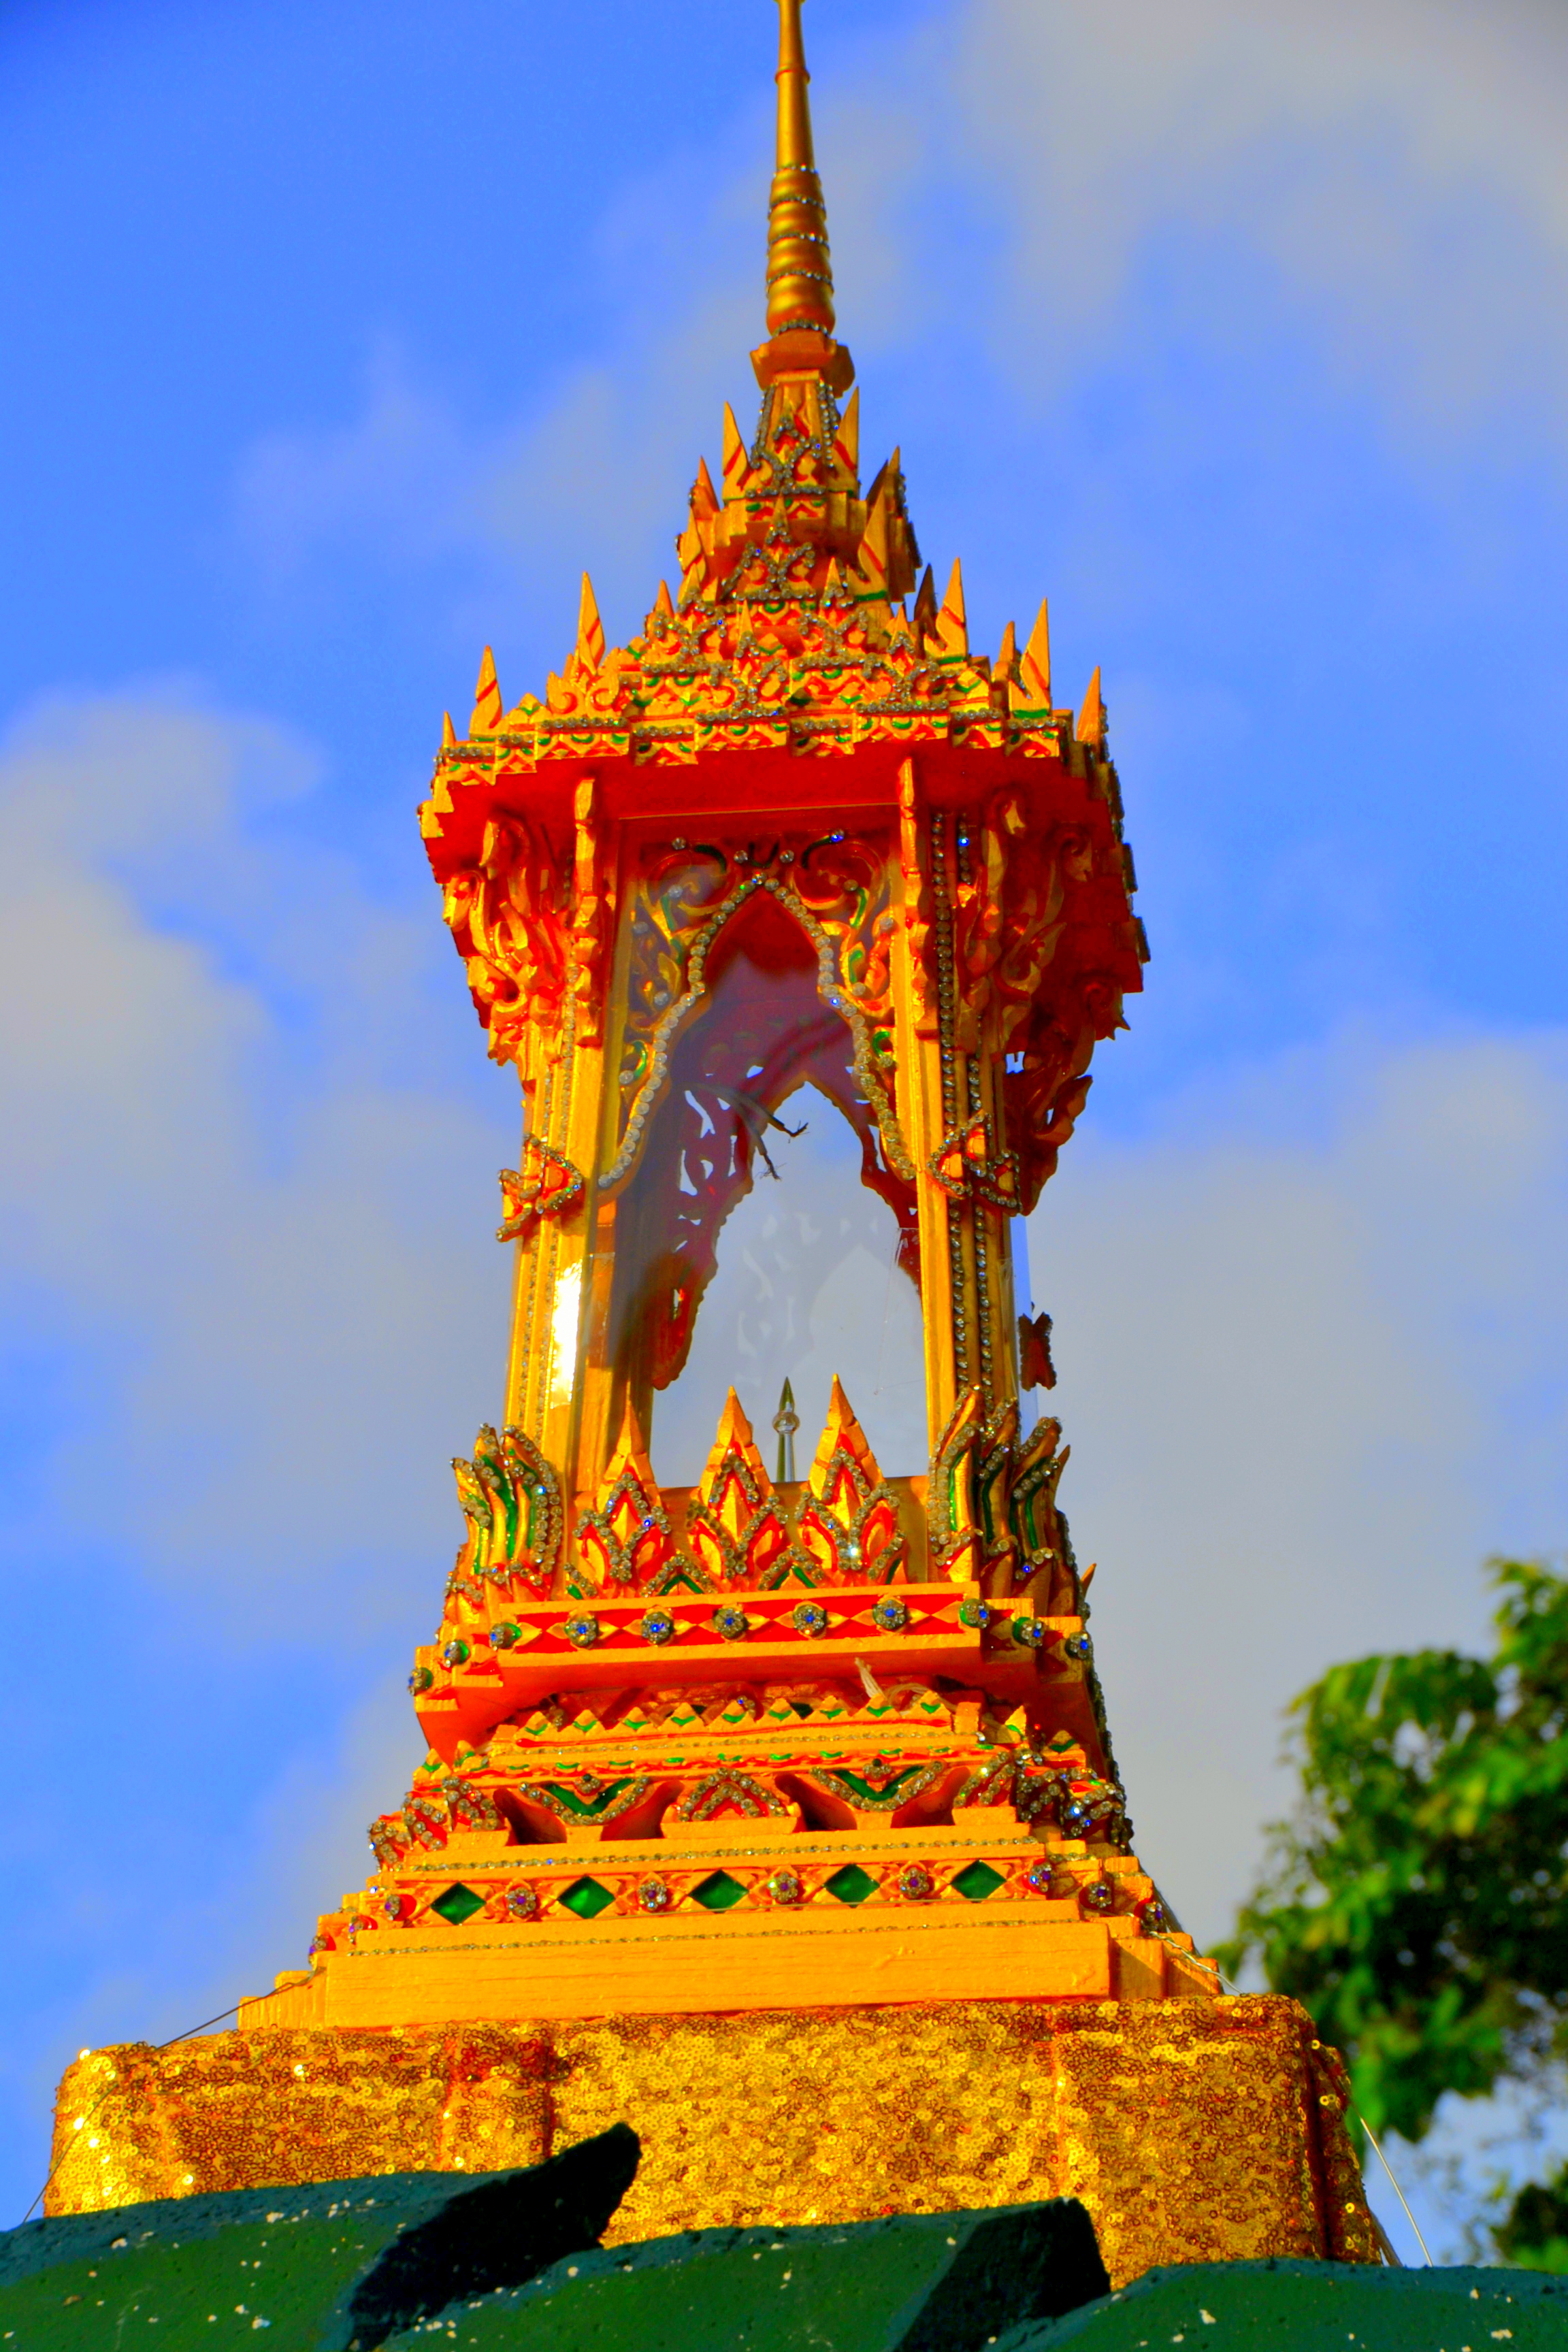 The relics are taken once a year from the high perch where they were placed in April 2009 by the late Supreme Patriarch.